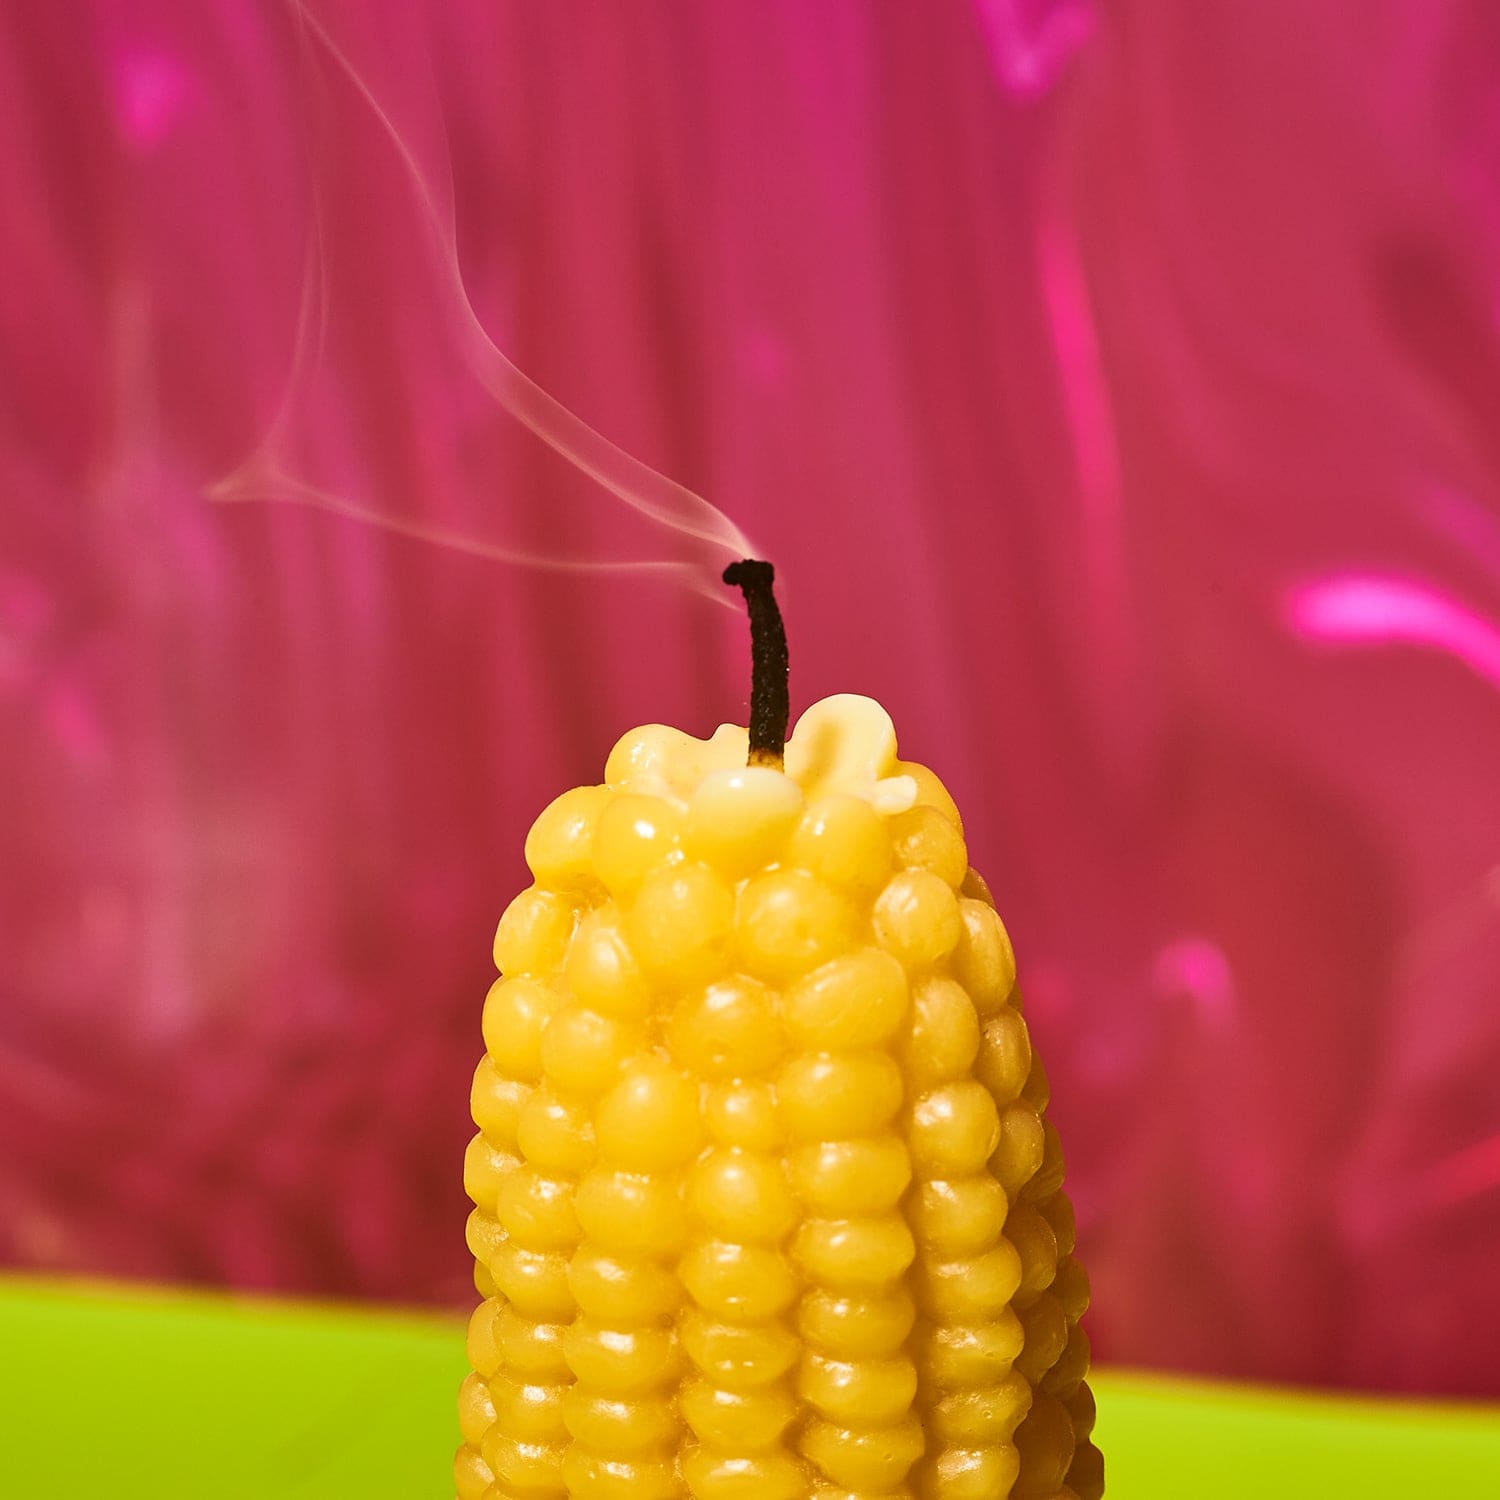 Beeswax Corn Cob Candle 0523 - Candle - Janinecontent - Q223